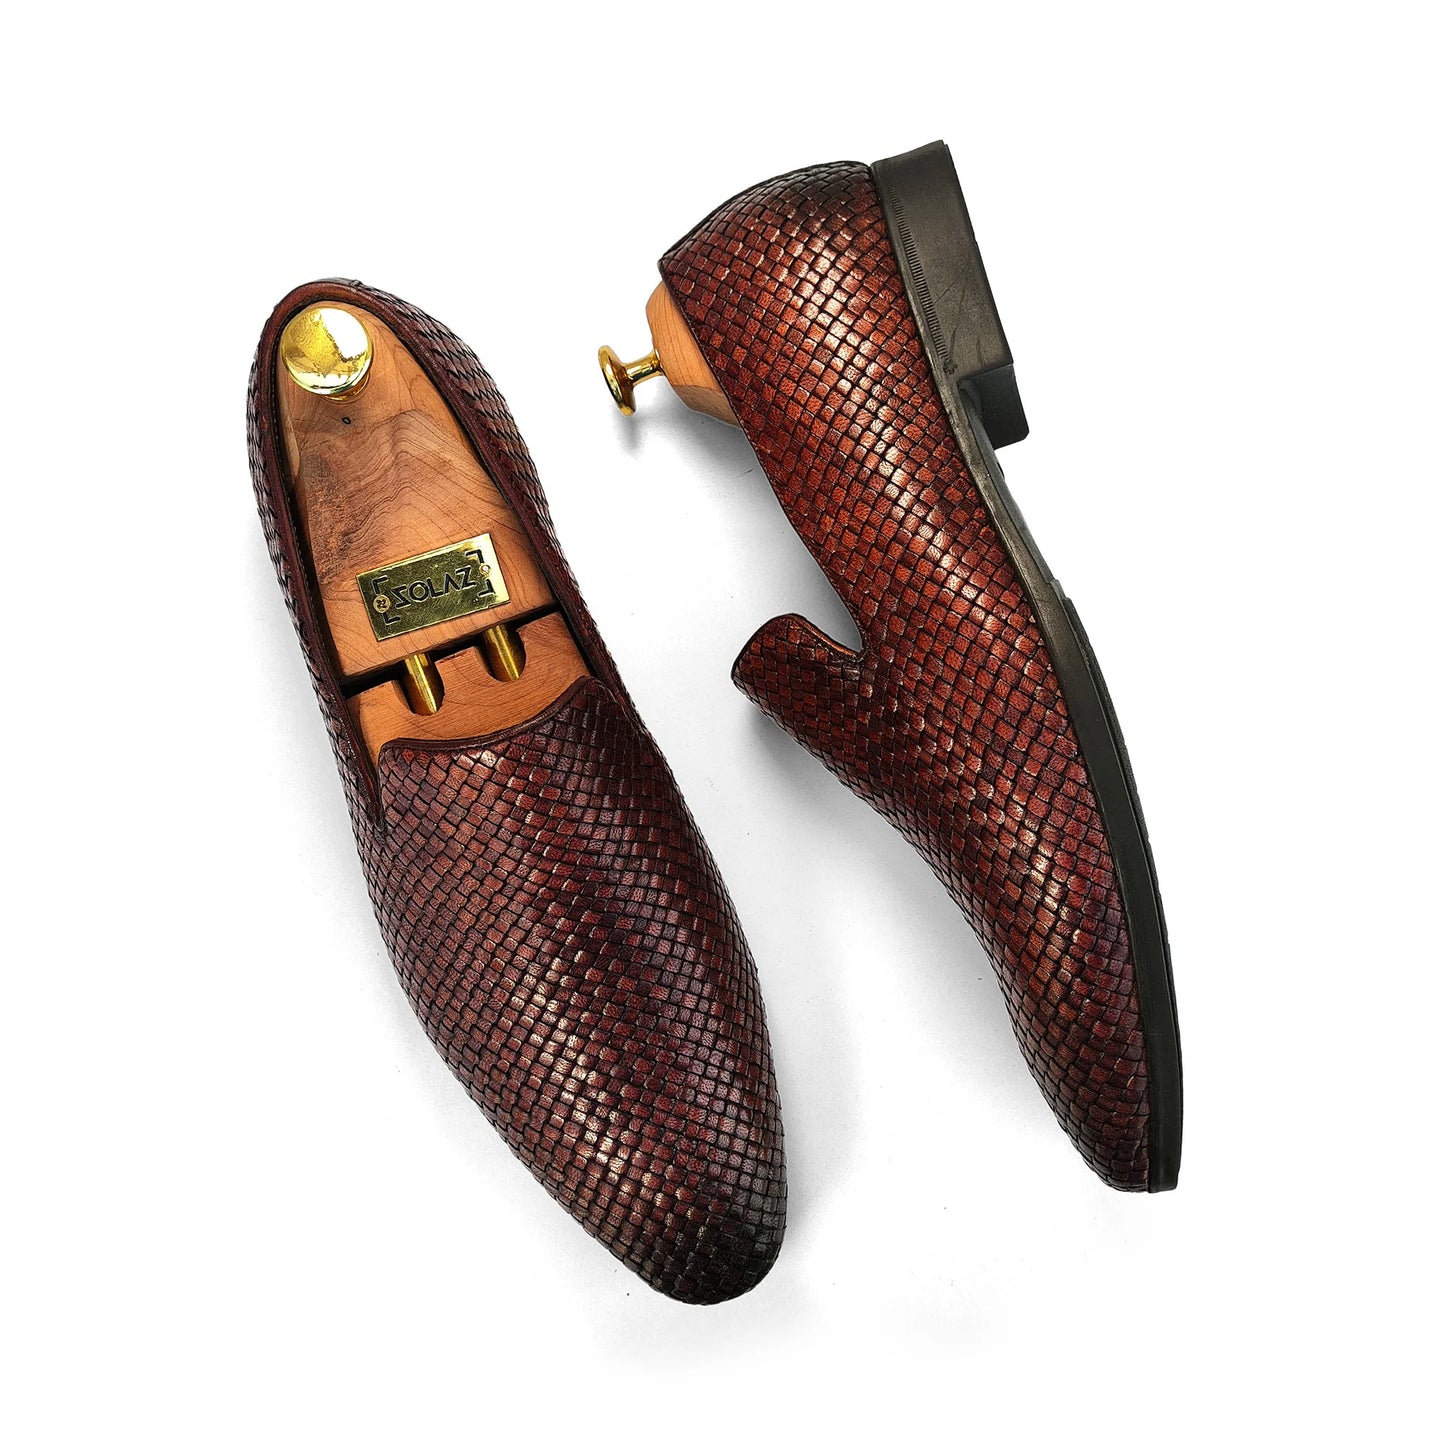 Solaz Brown Woven Loafer Slipons Shoes Made of Real Leather for Men